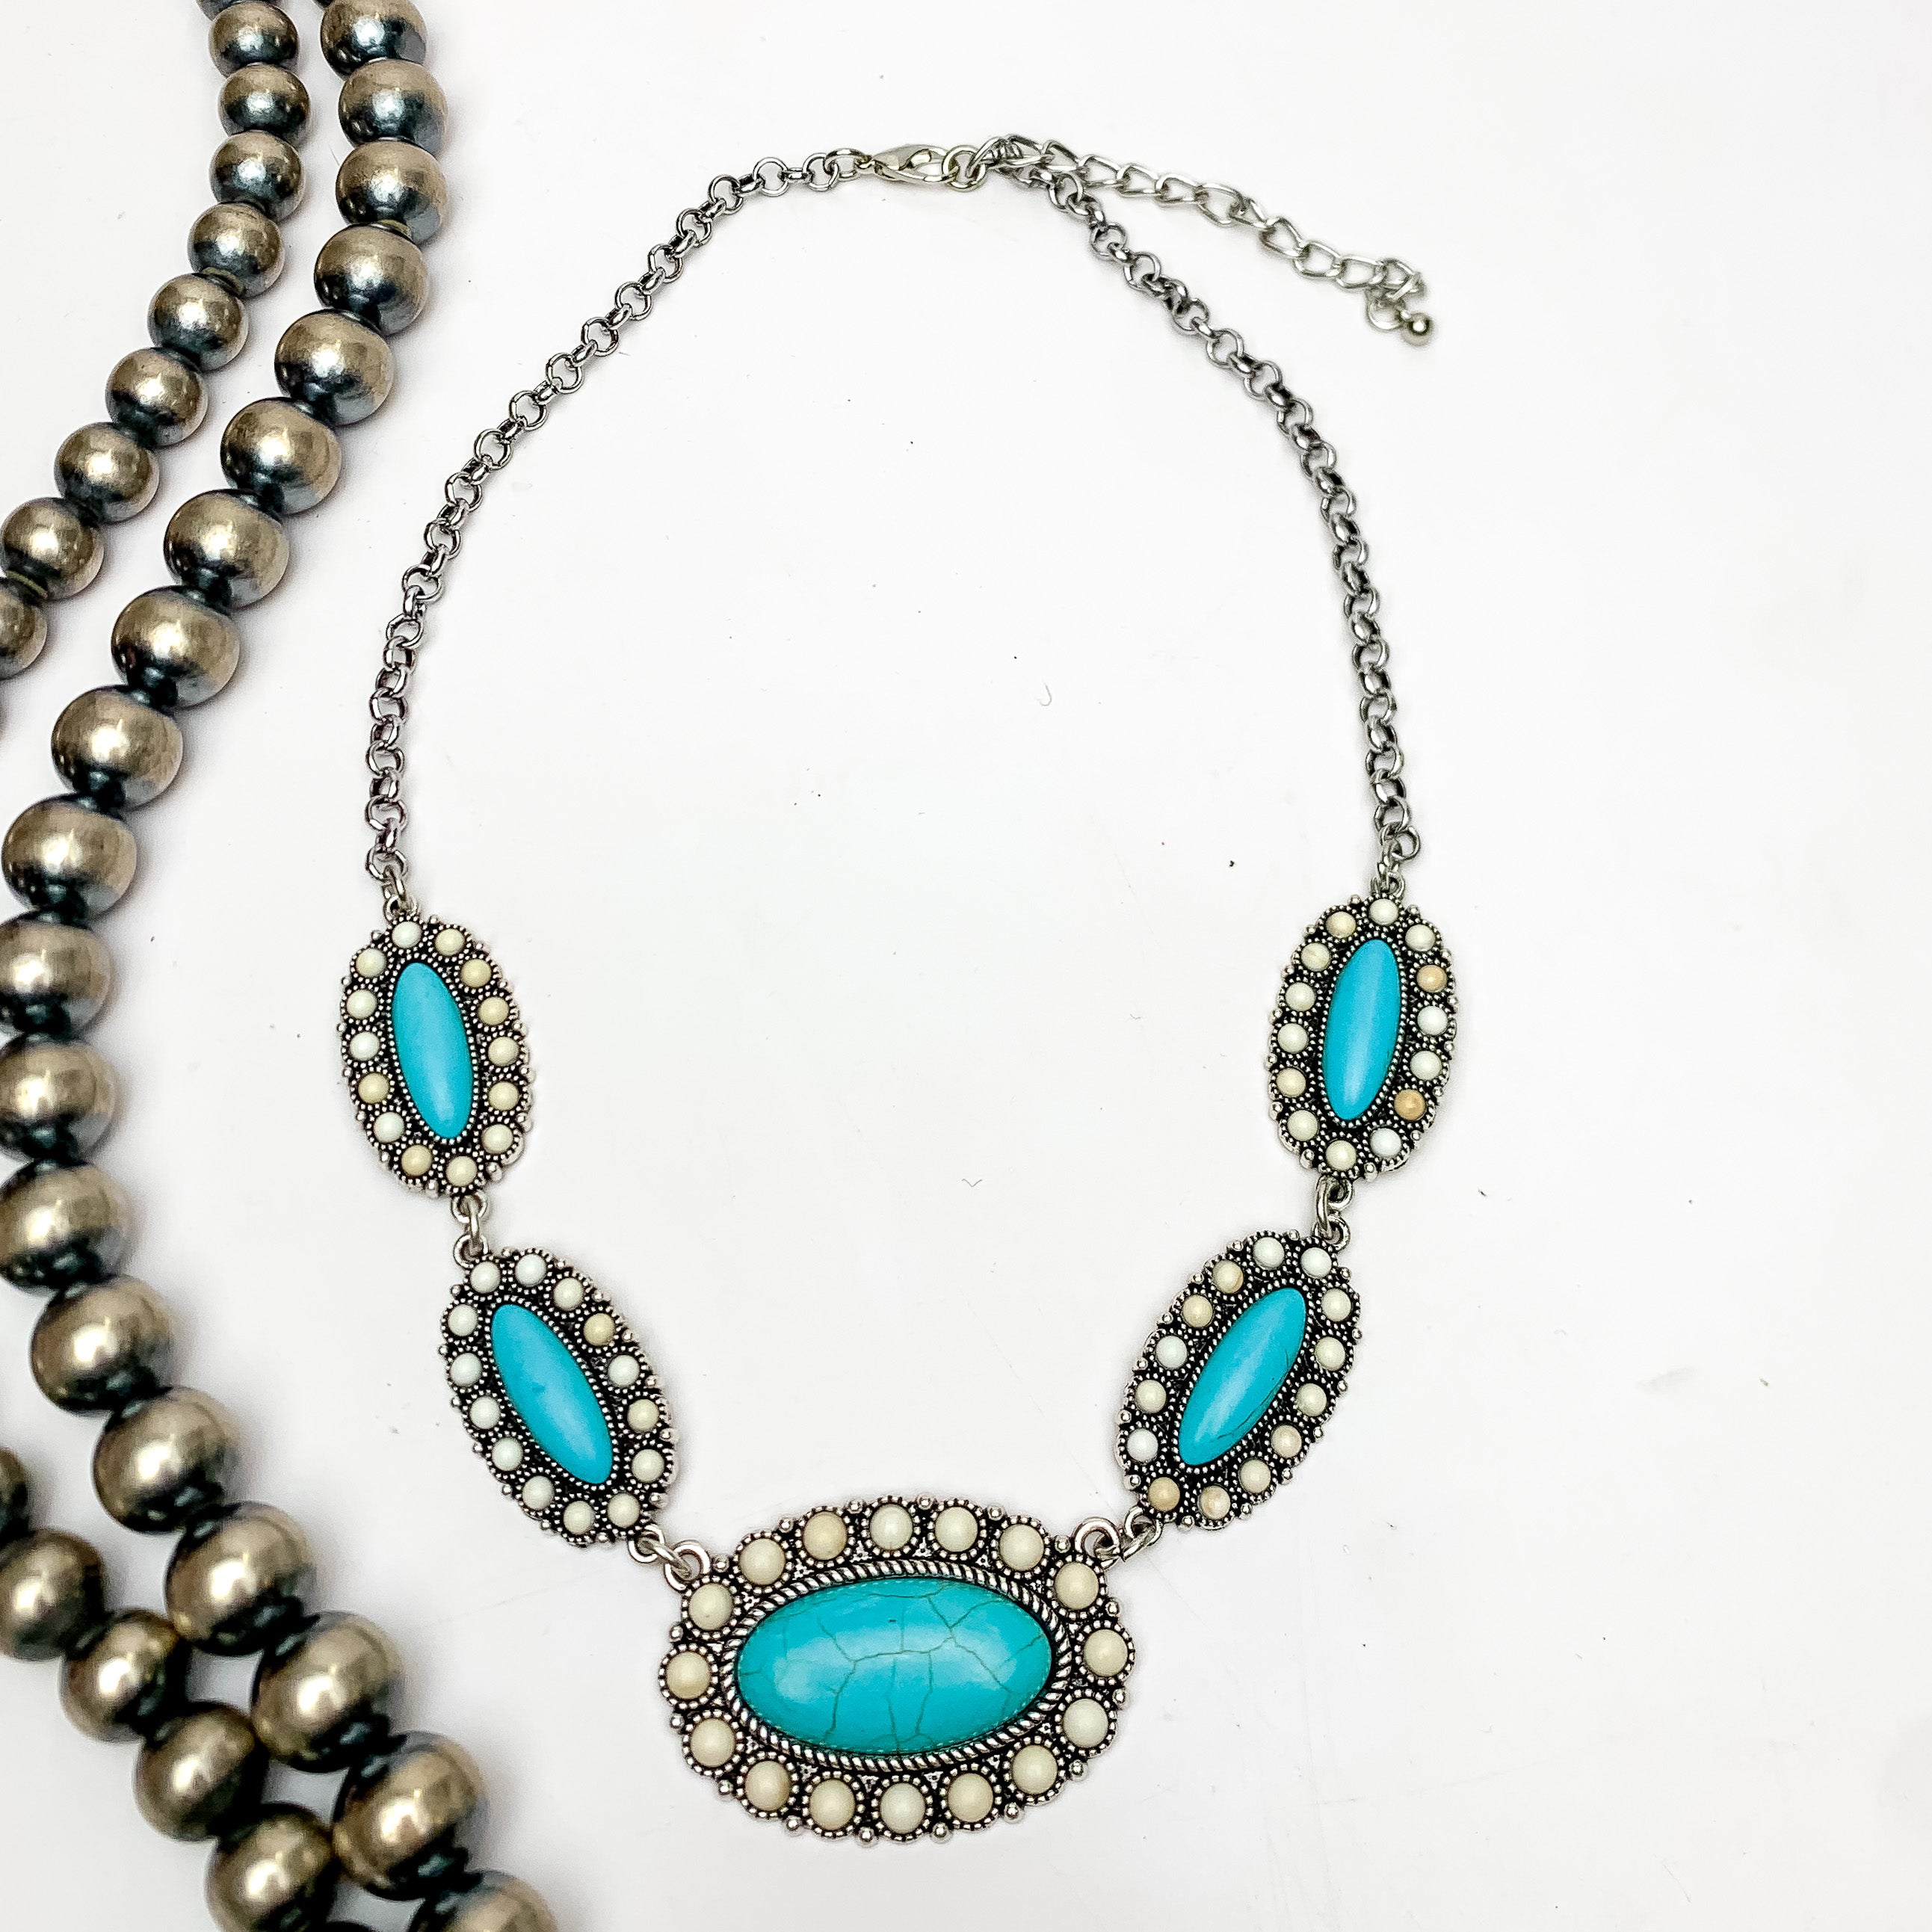 Western Silver Tone Necklace in turquoise blue and ivory. This necklace is on a white background with Navajo pearls on the left.